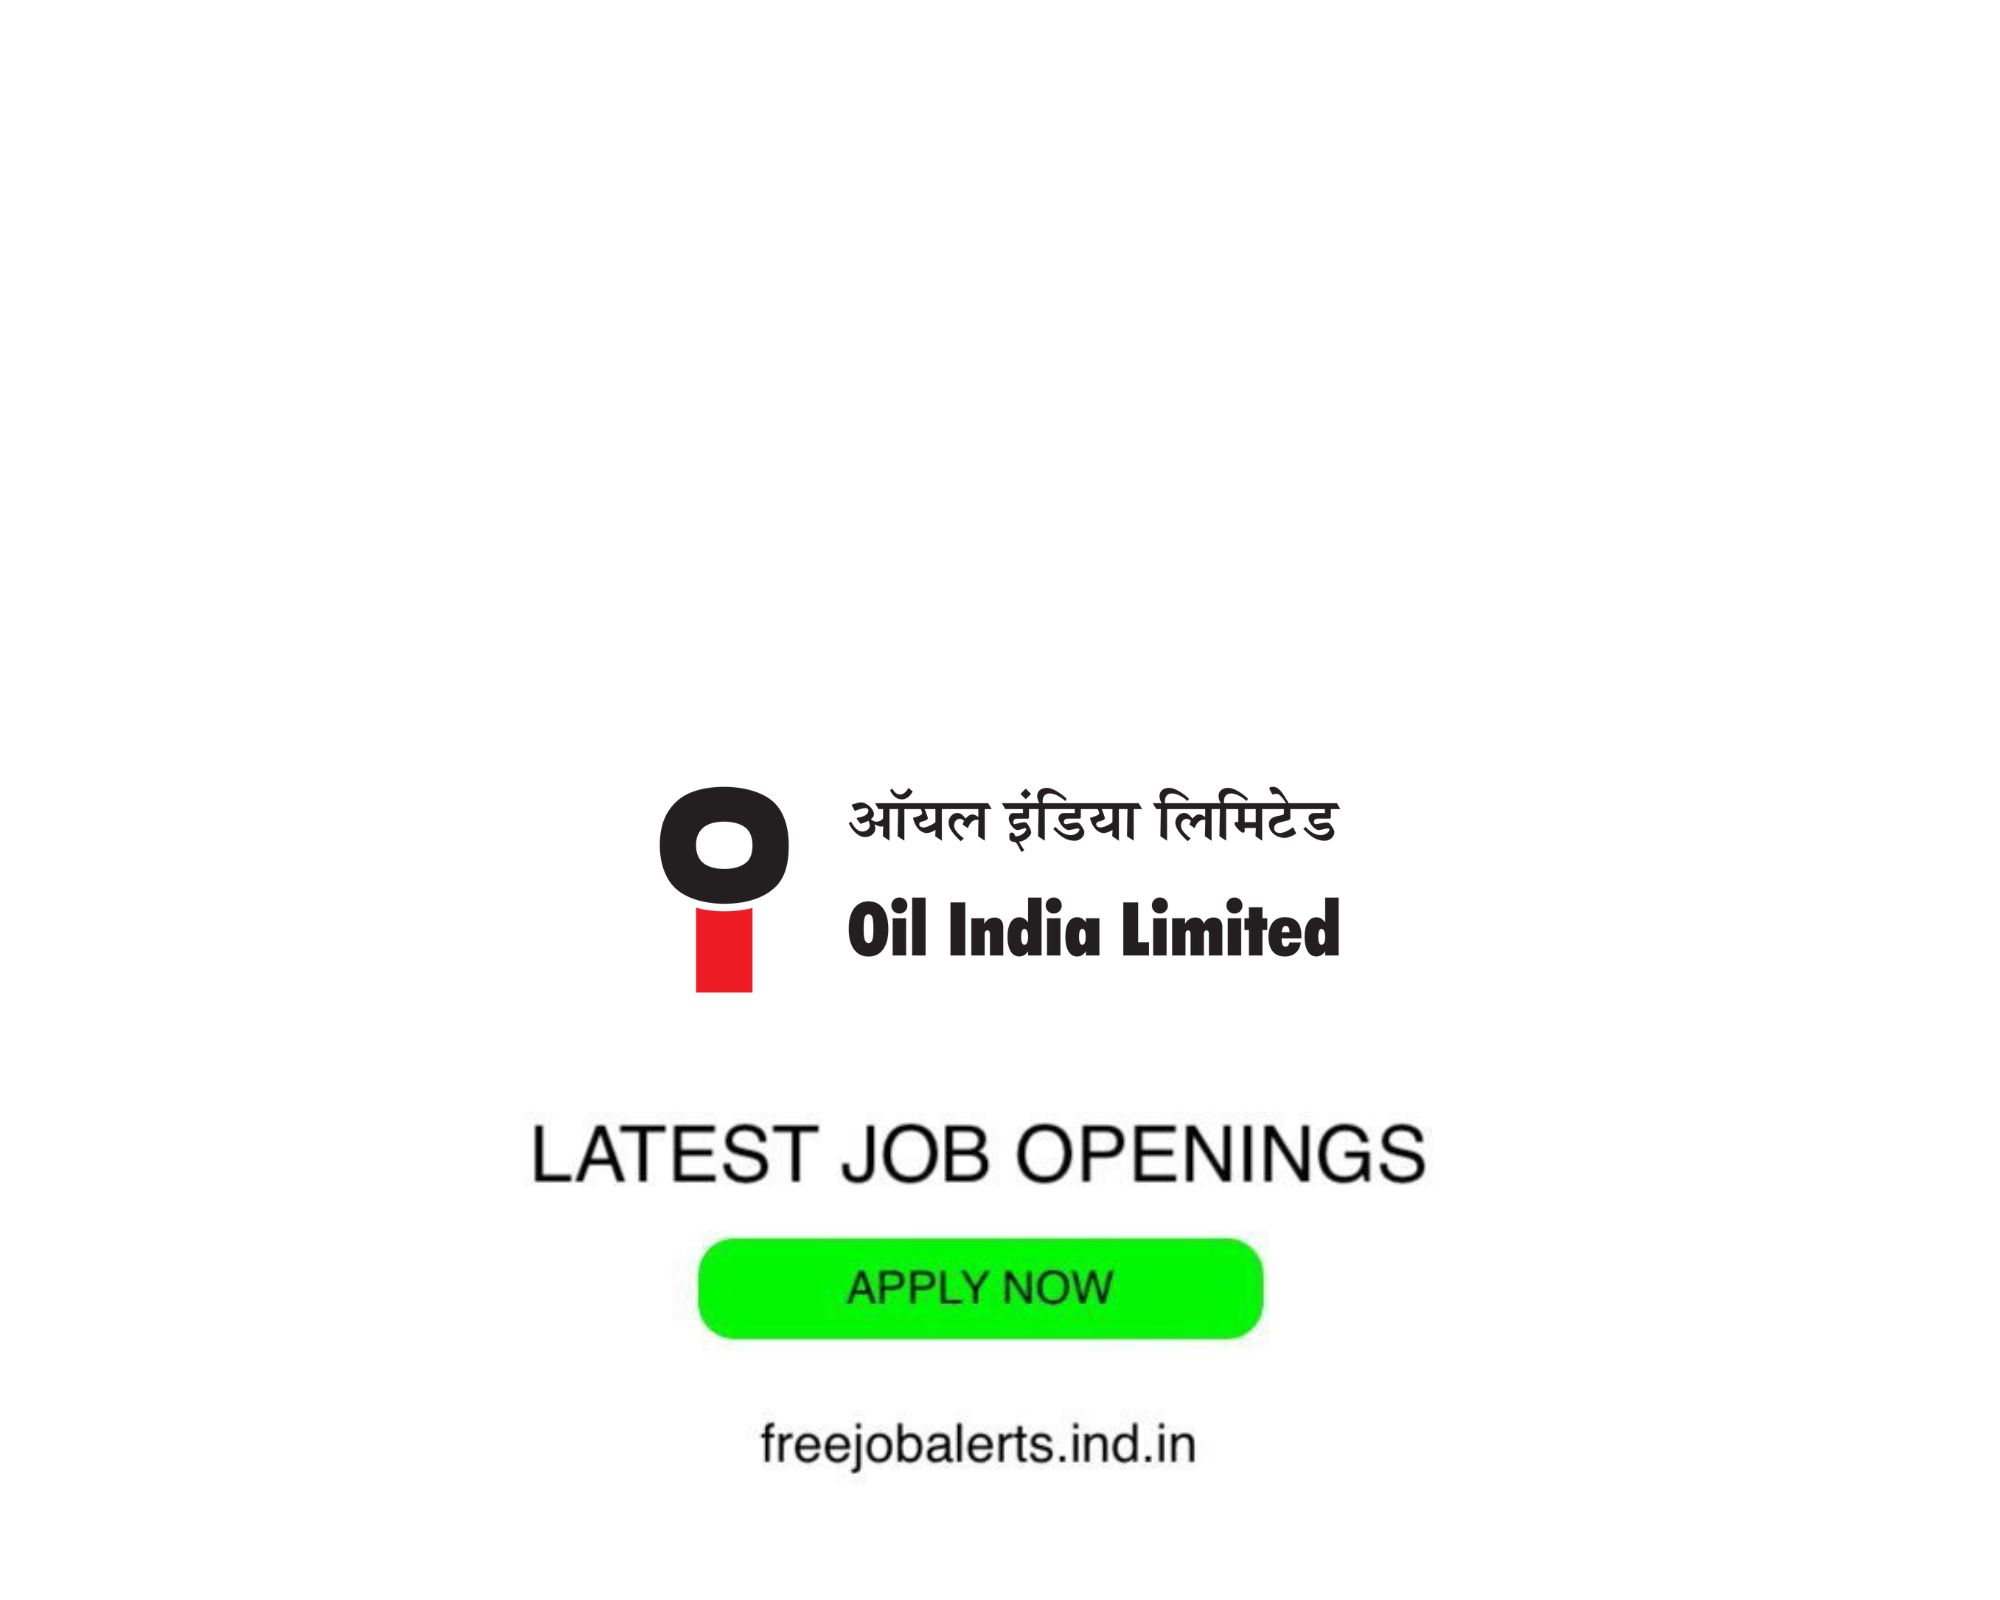 OIL - Oil India Limited - Latest Govt job openings - Free job alerts, Indian Govt Jobs